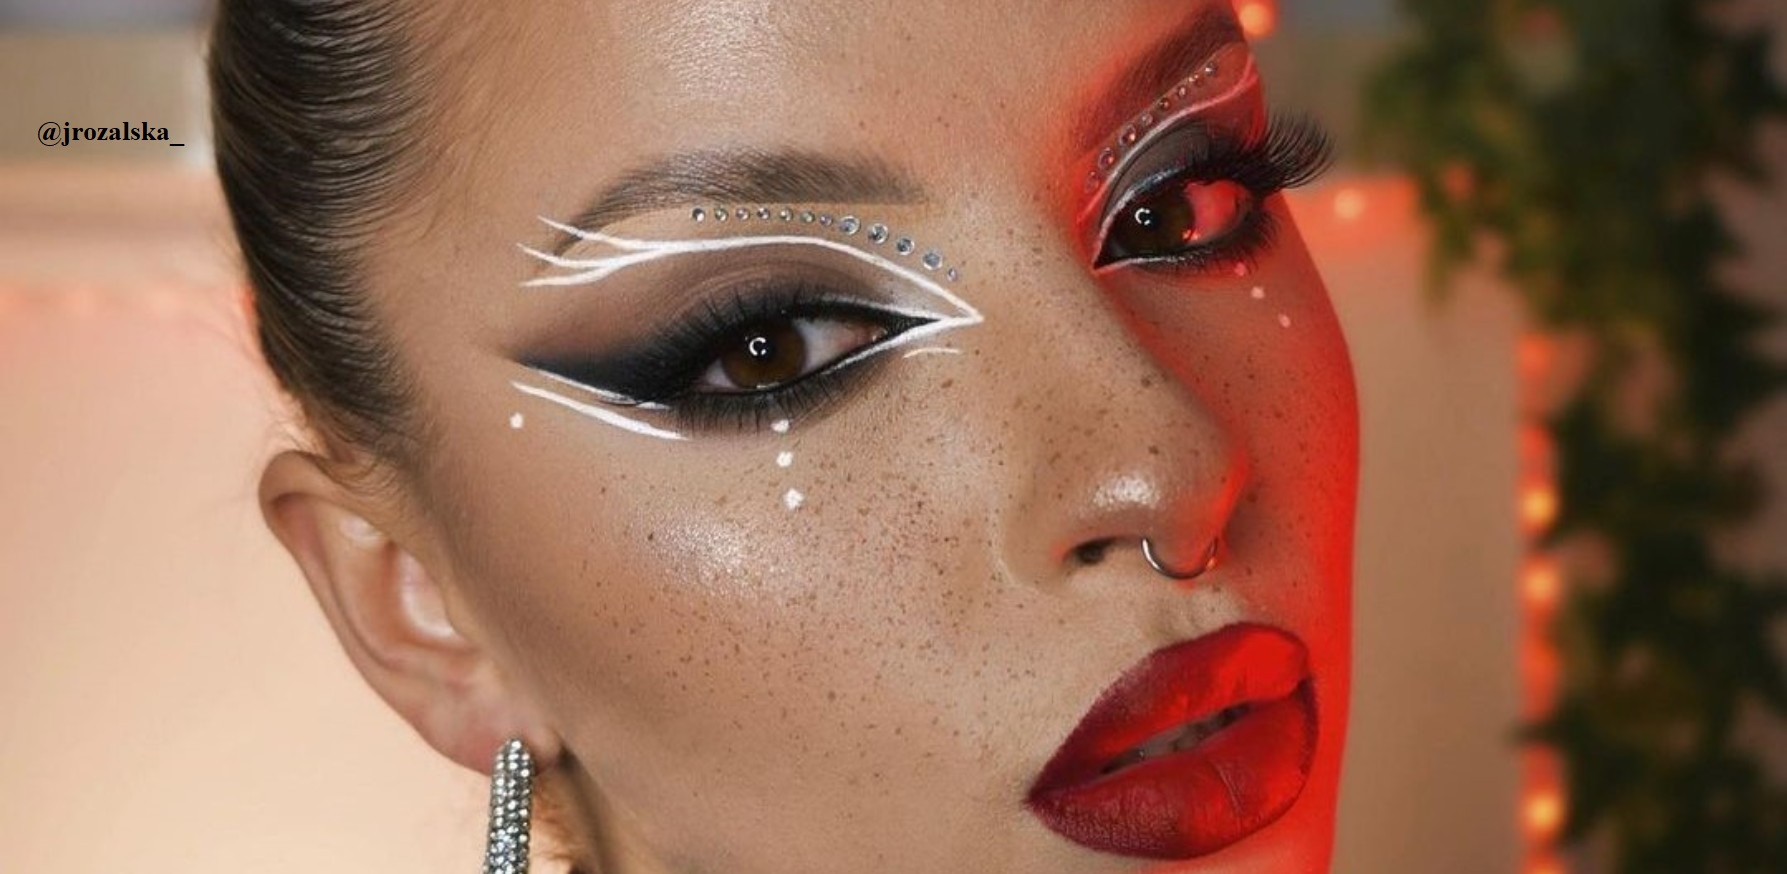 White Eyeliner With Epic Makeup Looks Will Take Your Breath Away